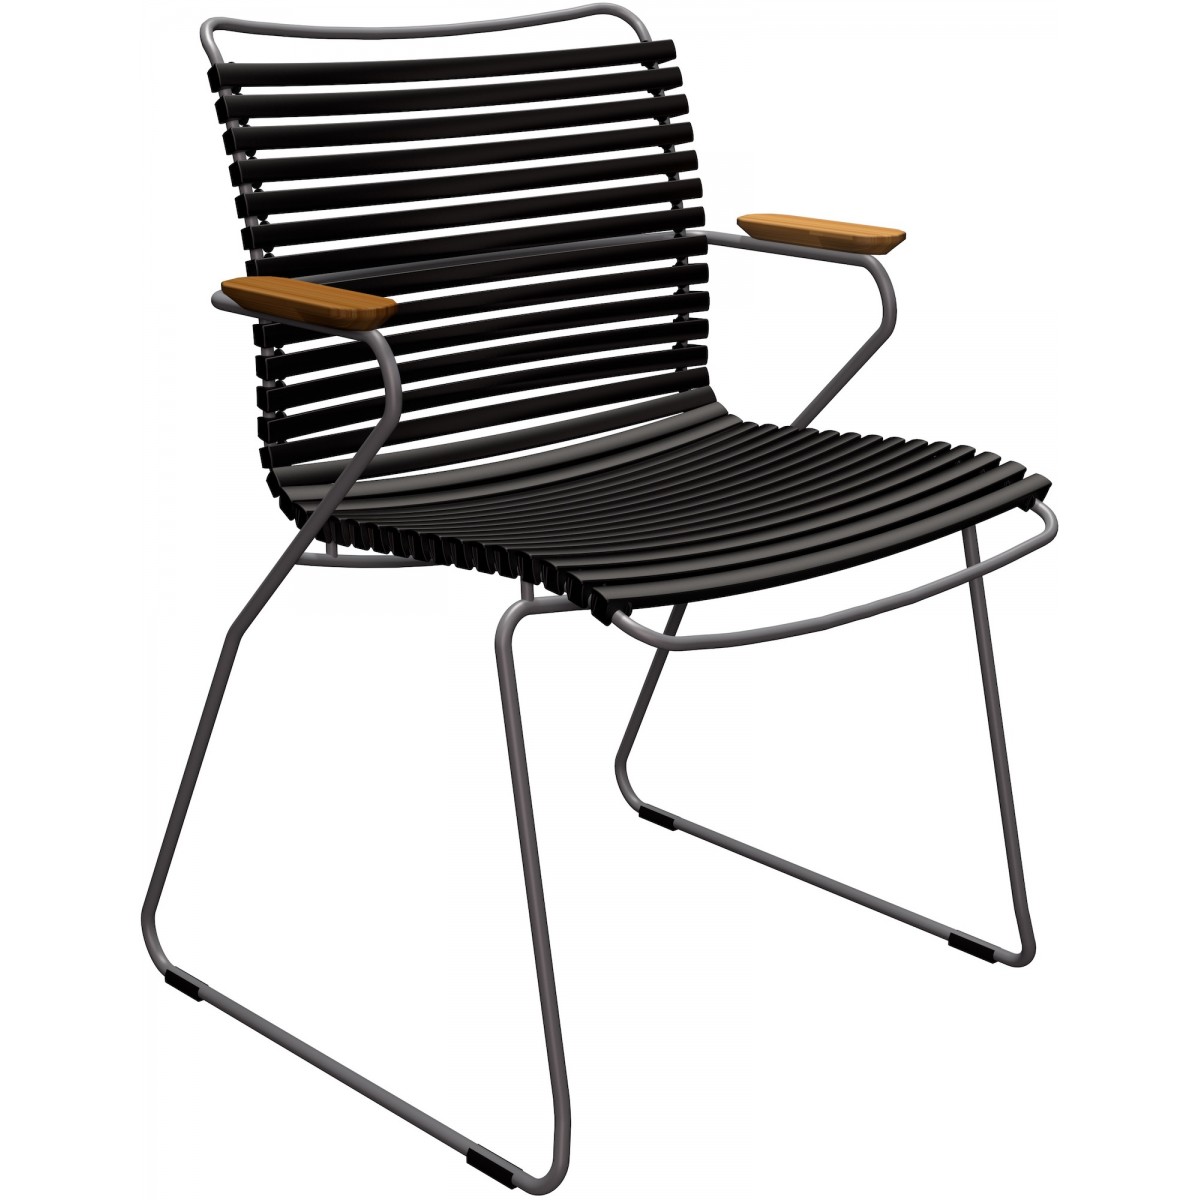 Black (20) - Click dining chair with armrests